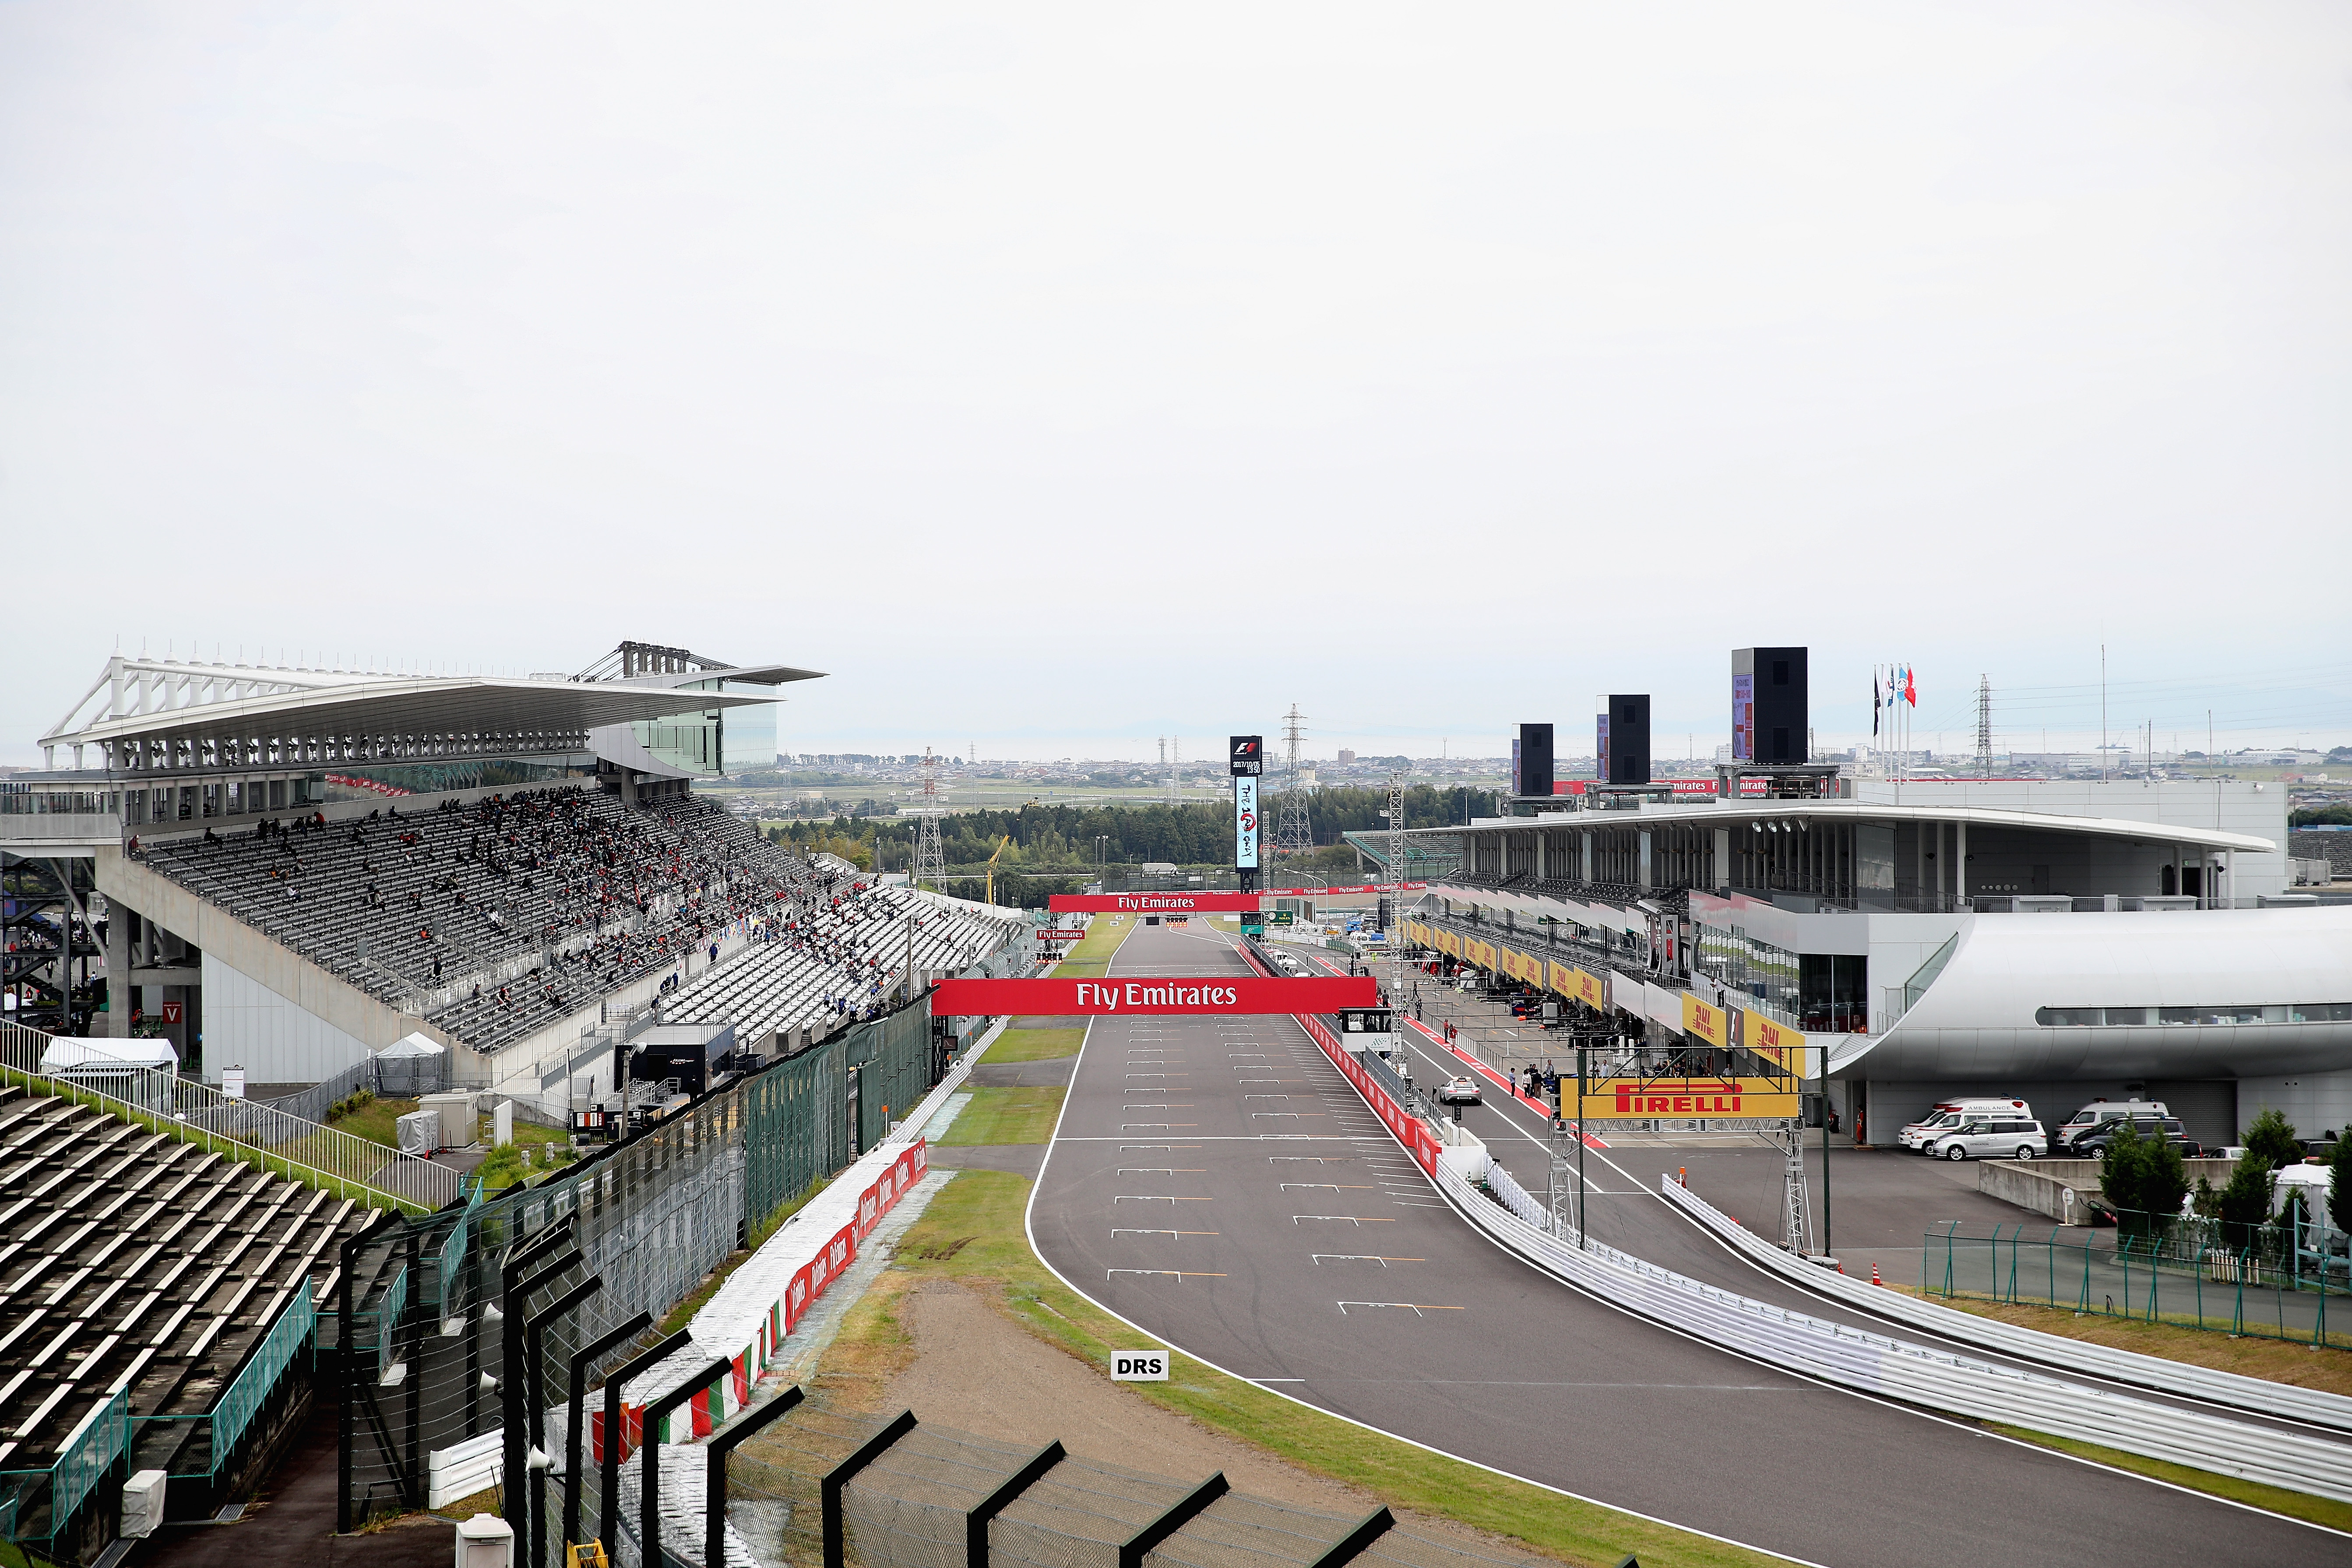 SUZUKA, JAPAN - OCTOBER 05:  A general view of the circuit during previews ahead of the Formula One Grand Prix of Japan at Suzuka Circuit on October 5, 2017 in Suzuka.  (Photo by Clive Mason/Getty Images)